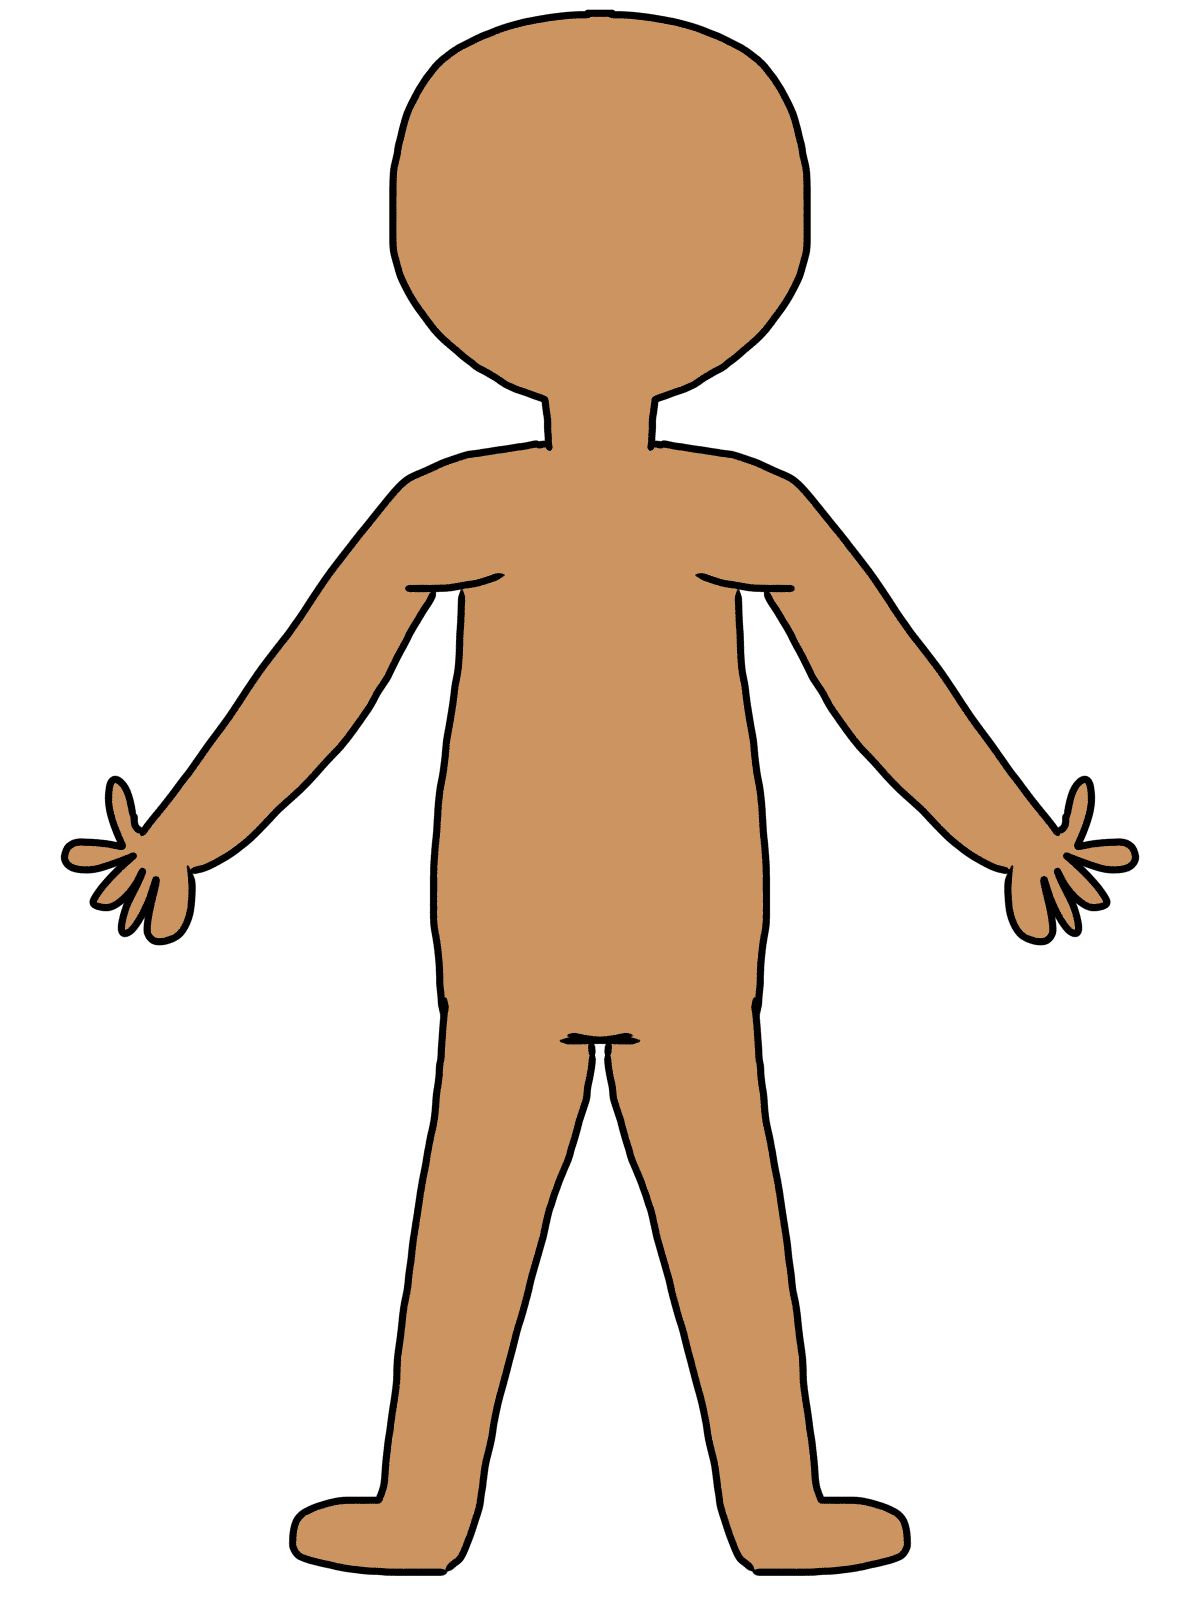 Clipart of the body image